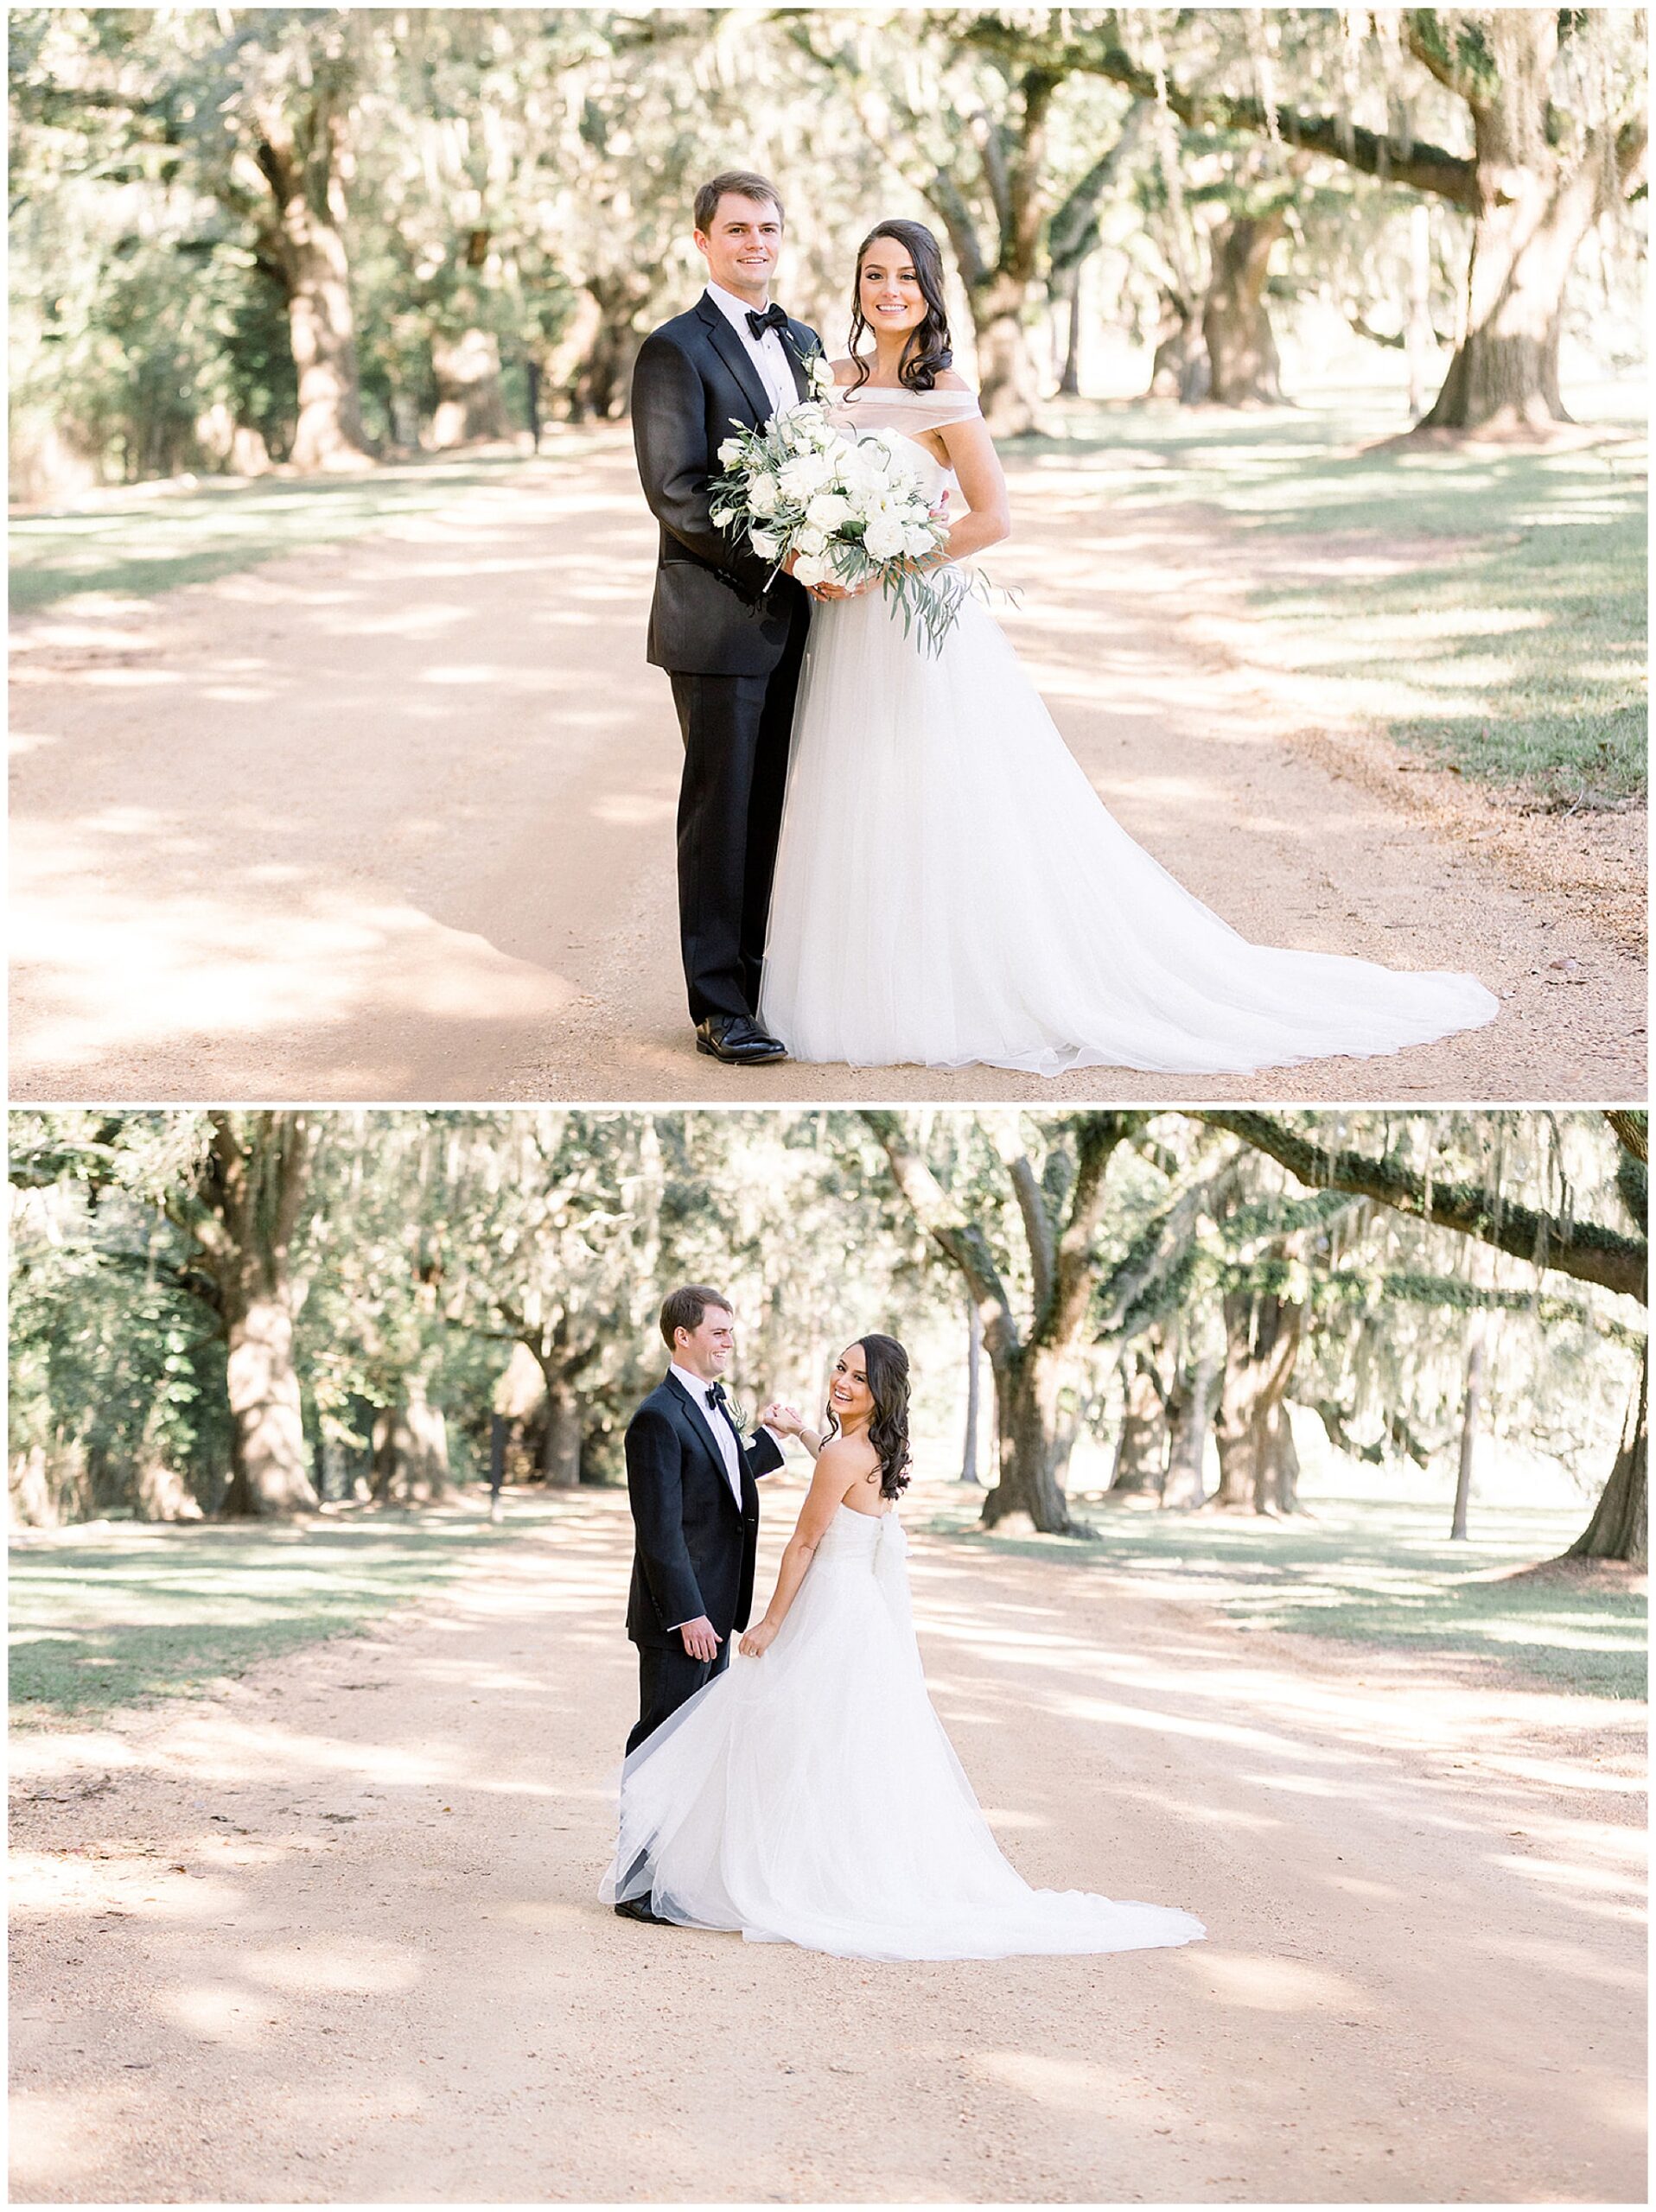 Newlyweds dance in the middle of a dirt road surrounded by old oak trees at south eden plantation